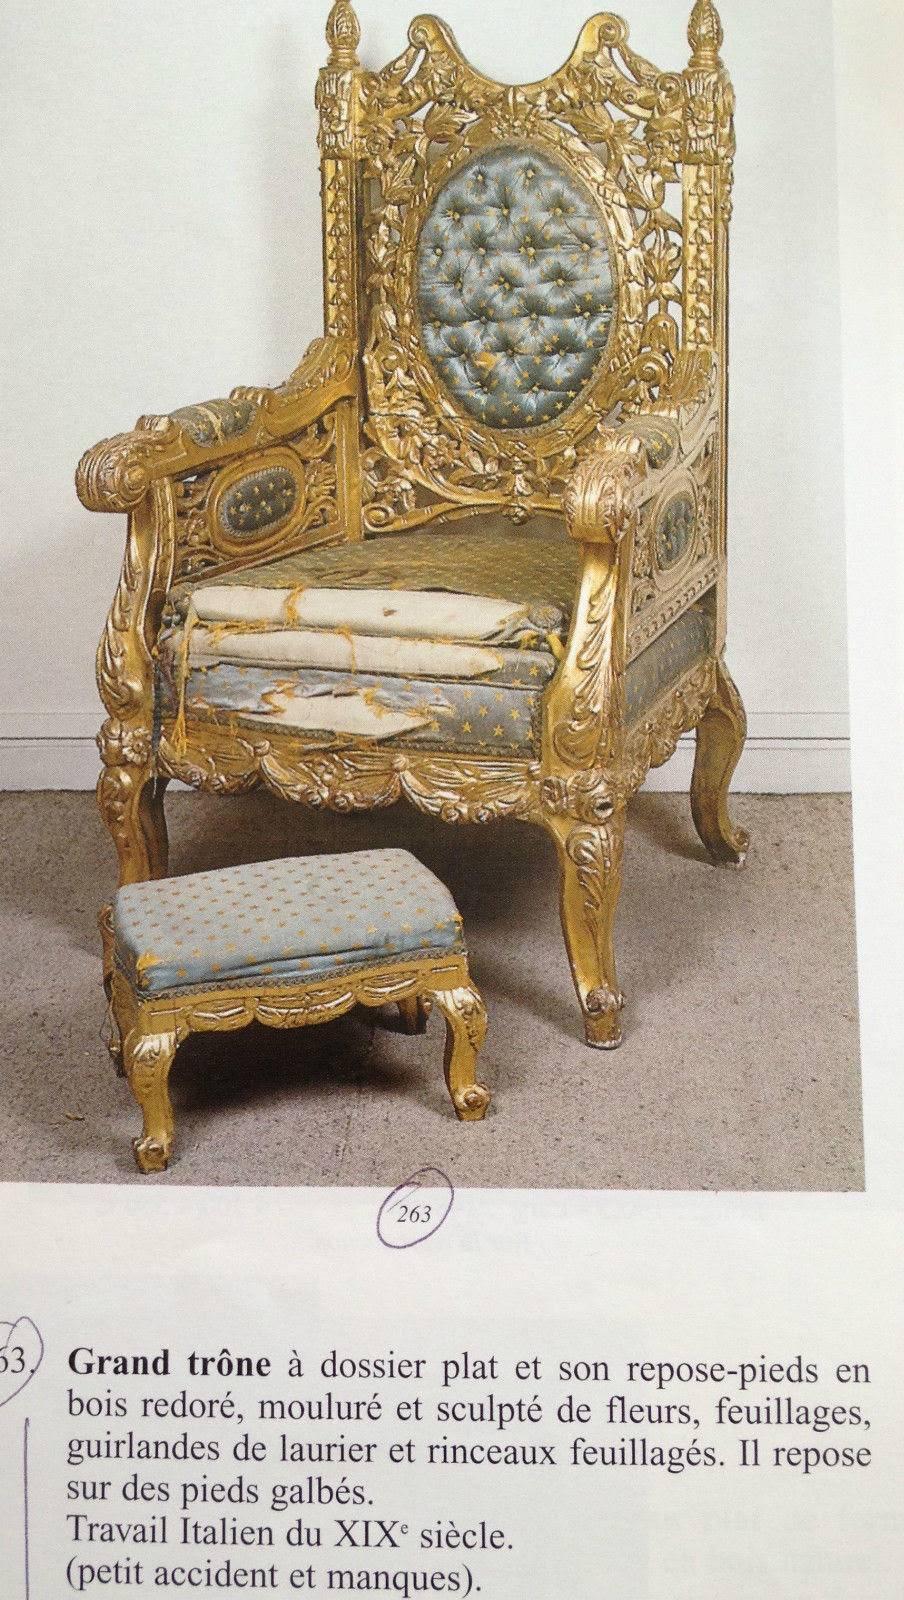 Exceptional Throne Italian 1850 original need to be restored after a long period in storage. Important provenance from Palace de So.... In France near Paris. Expertise in picture. Its not reproduction.
The frame of the Throne are in good condition